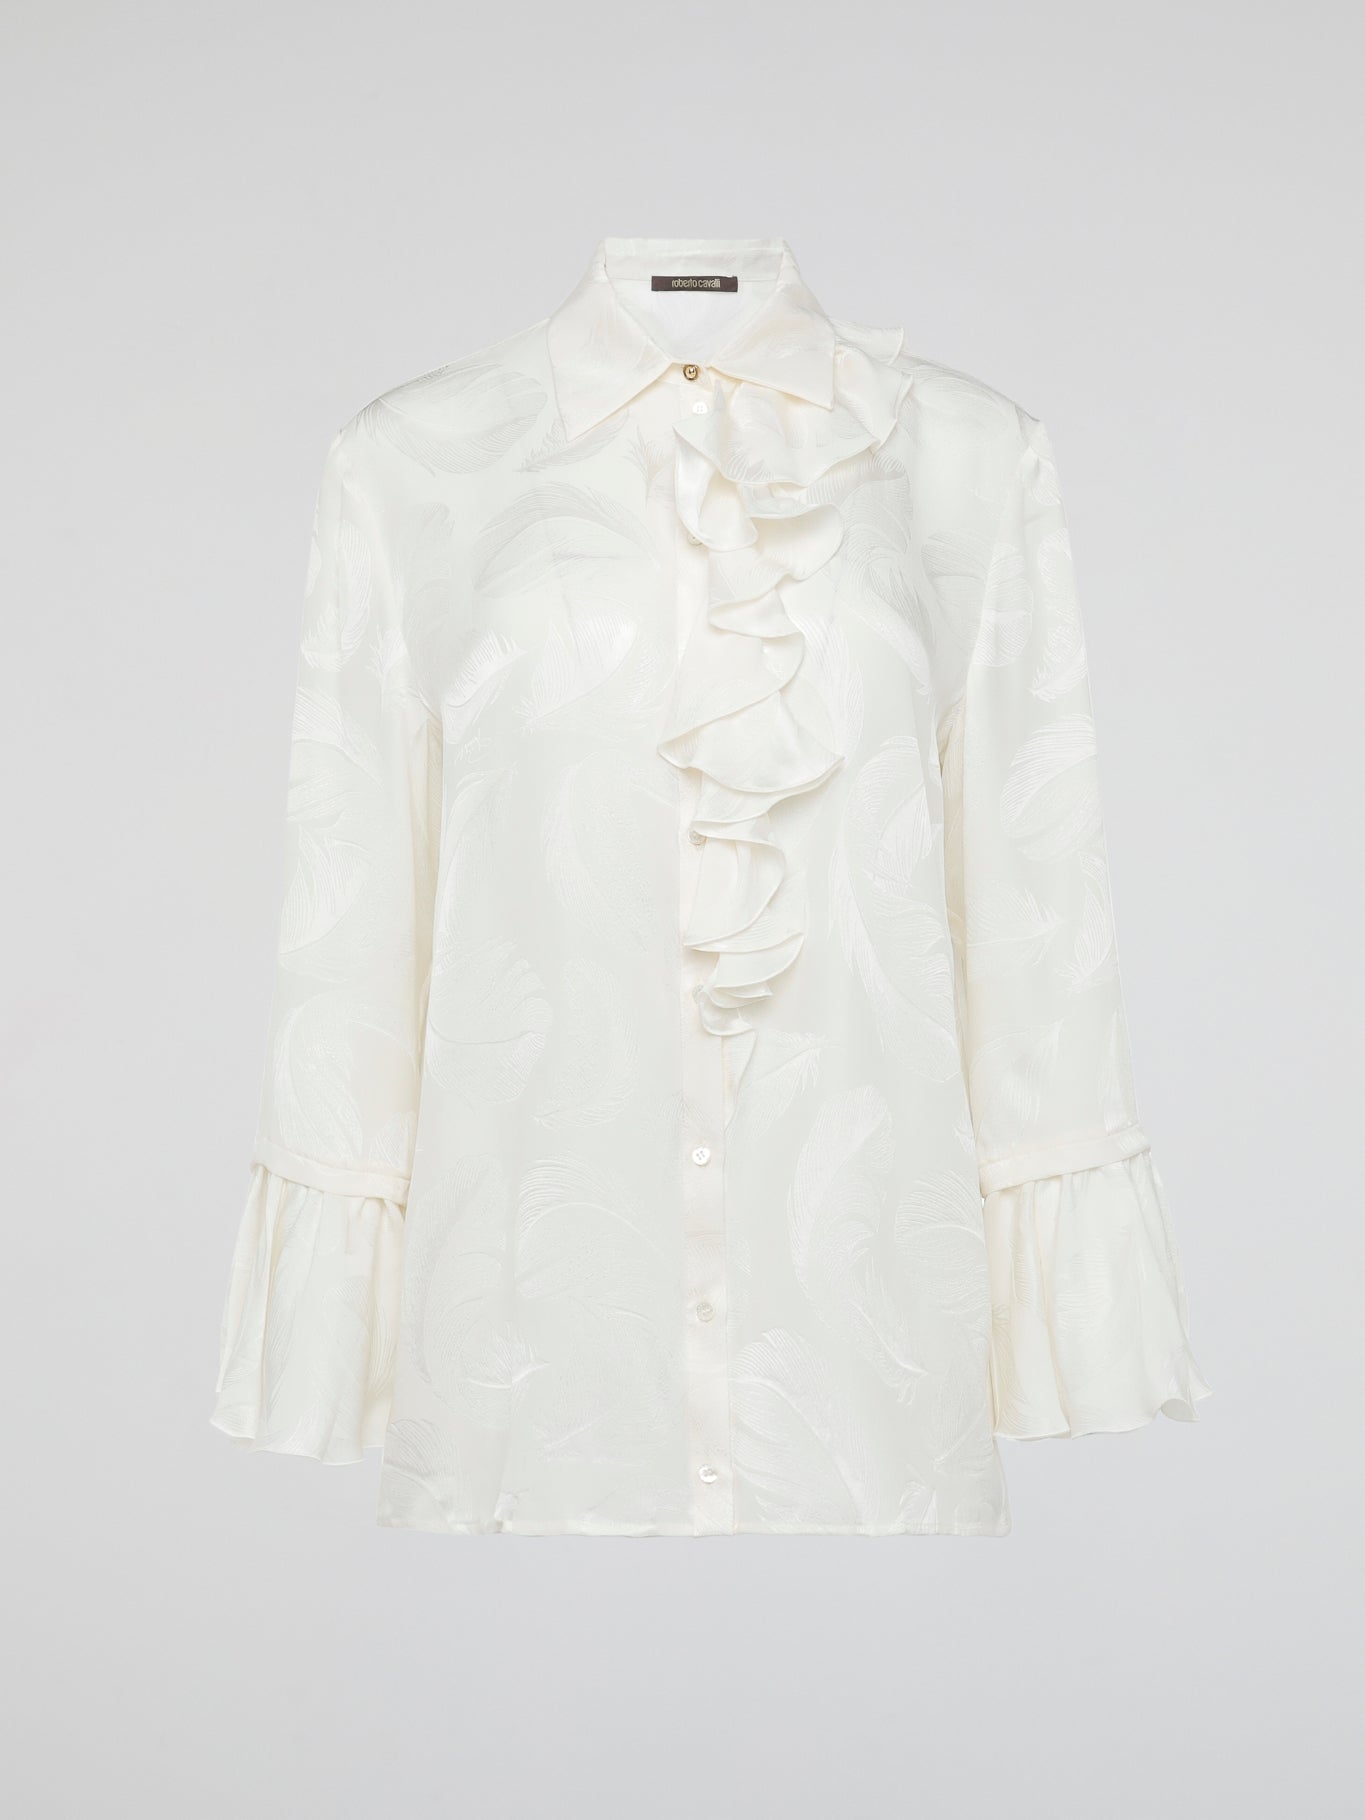 Embrace the essence of high-end fashion with the Ruffle Detailed Shirt by Roberto Cavalli. This stunning piece perfectly combines elegance and playfulness with its intricate ruffles that gracefully dance along the collar and cuffs. Crafted from luxurious materials, this shirt is a true statement piece that effortlessly elevates any outfit.